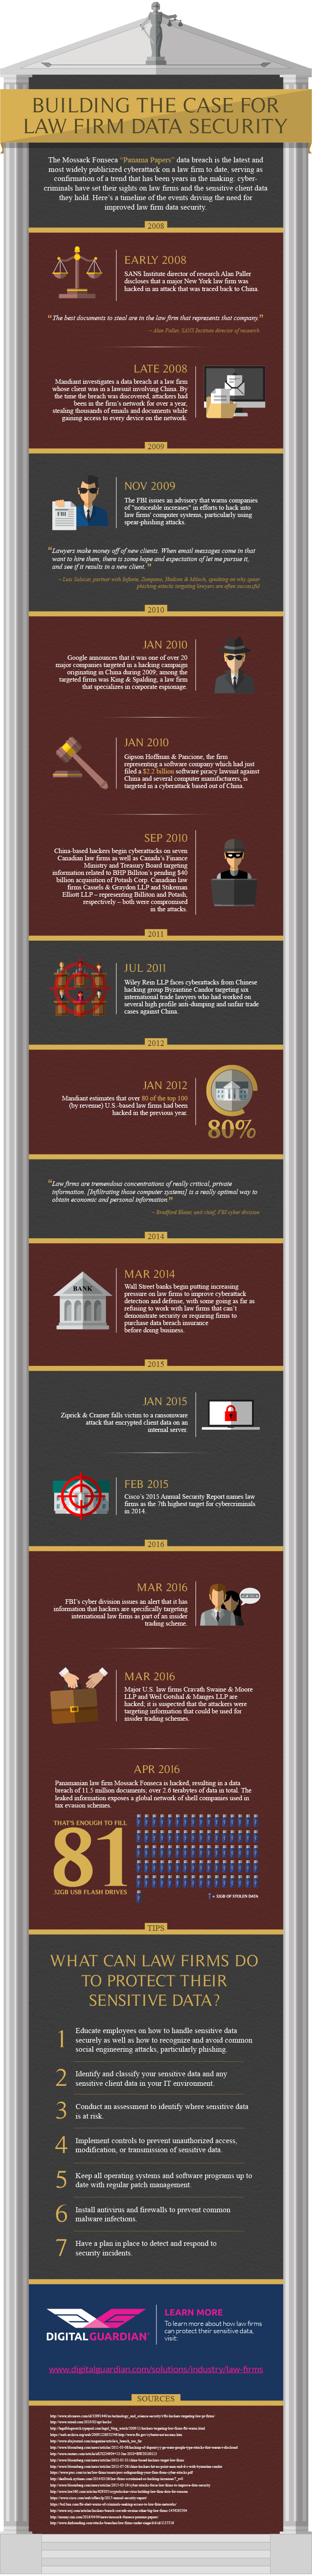 Building the Case for Law Firm Data Security Infographic